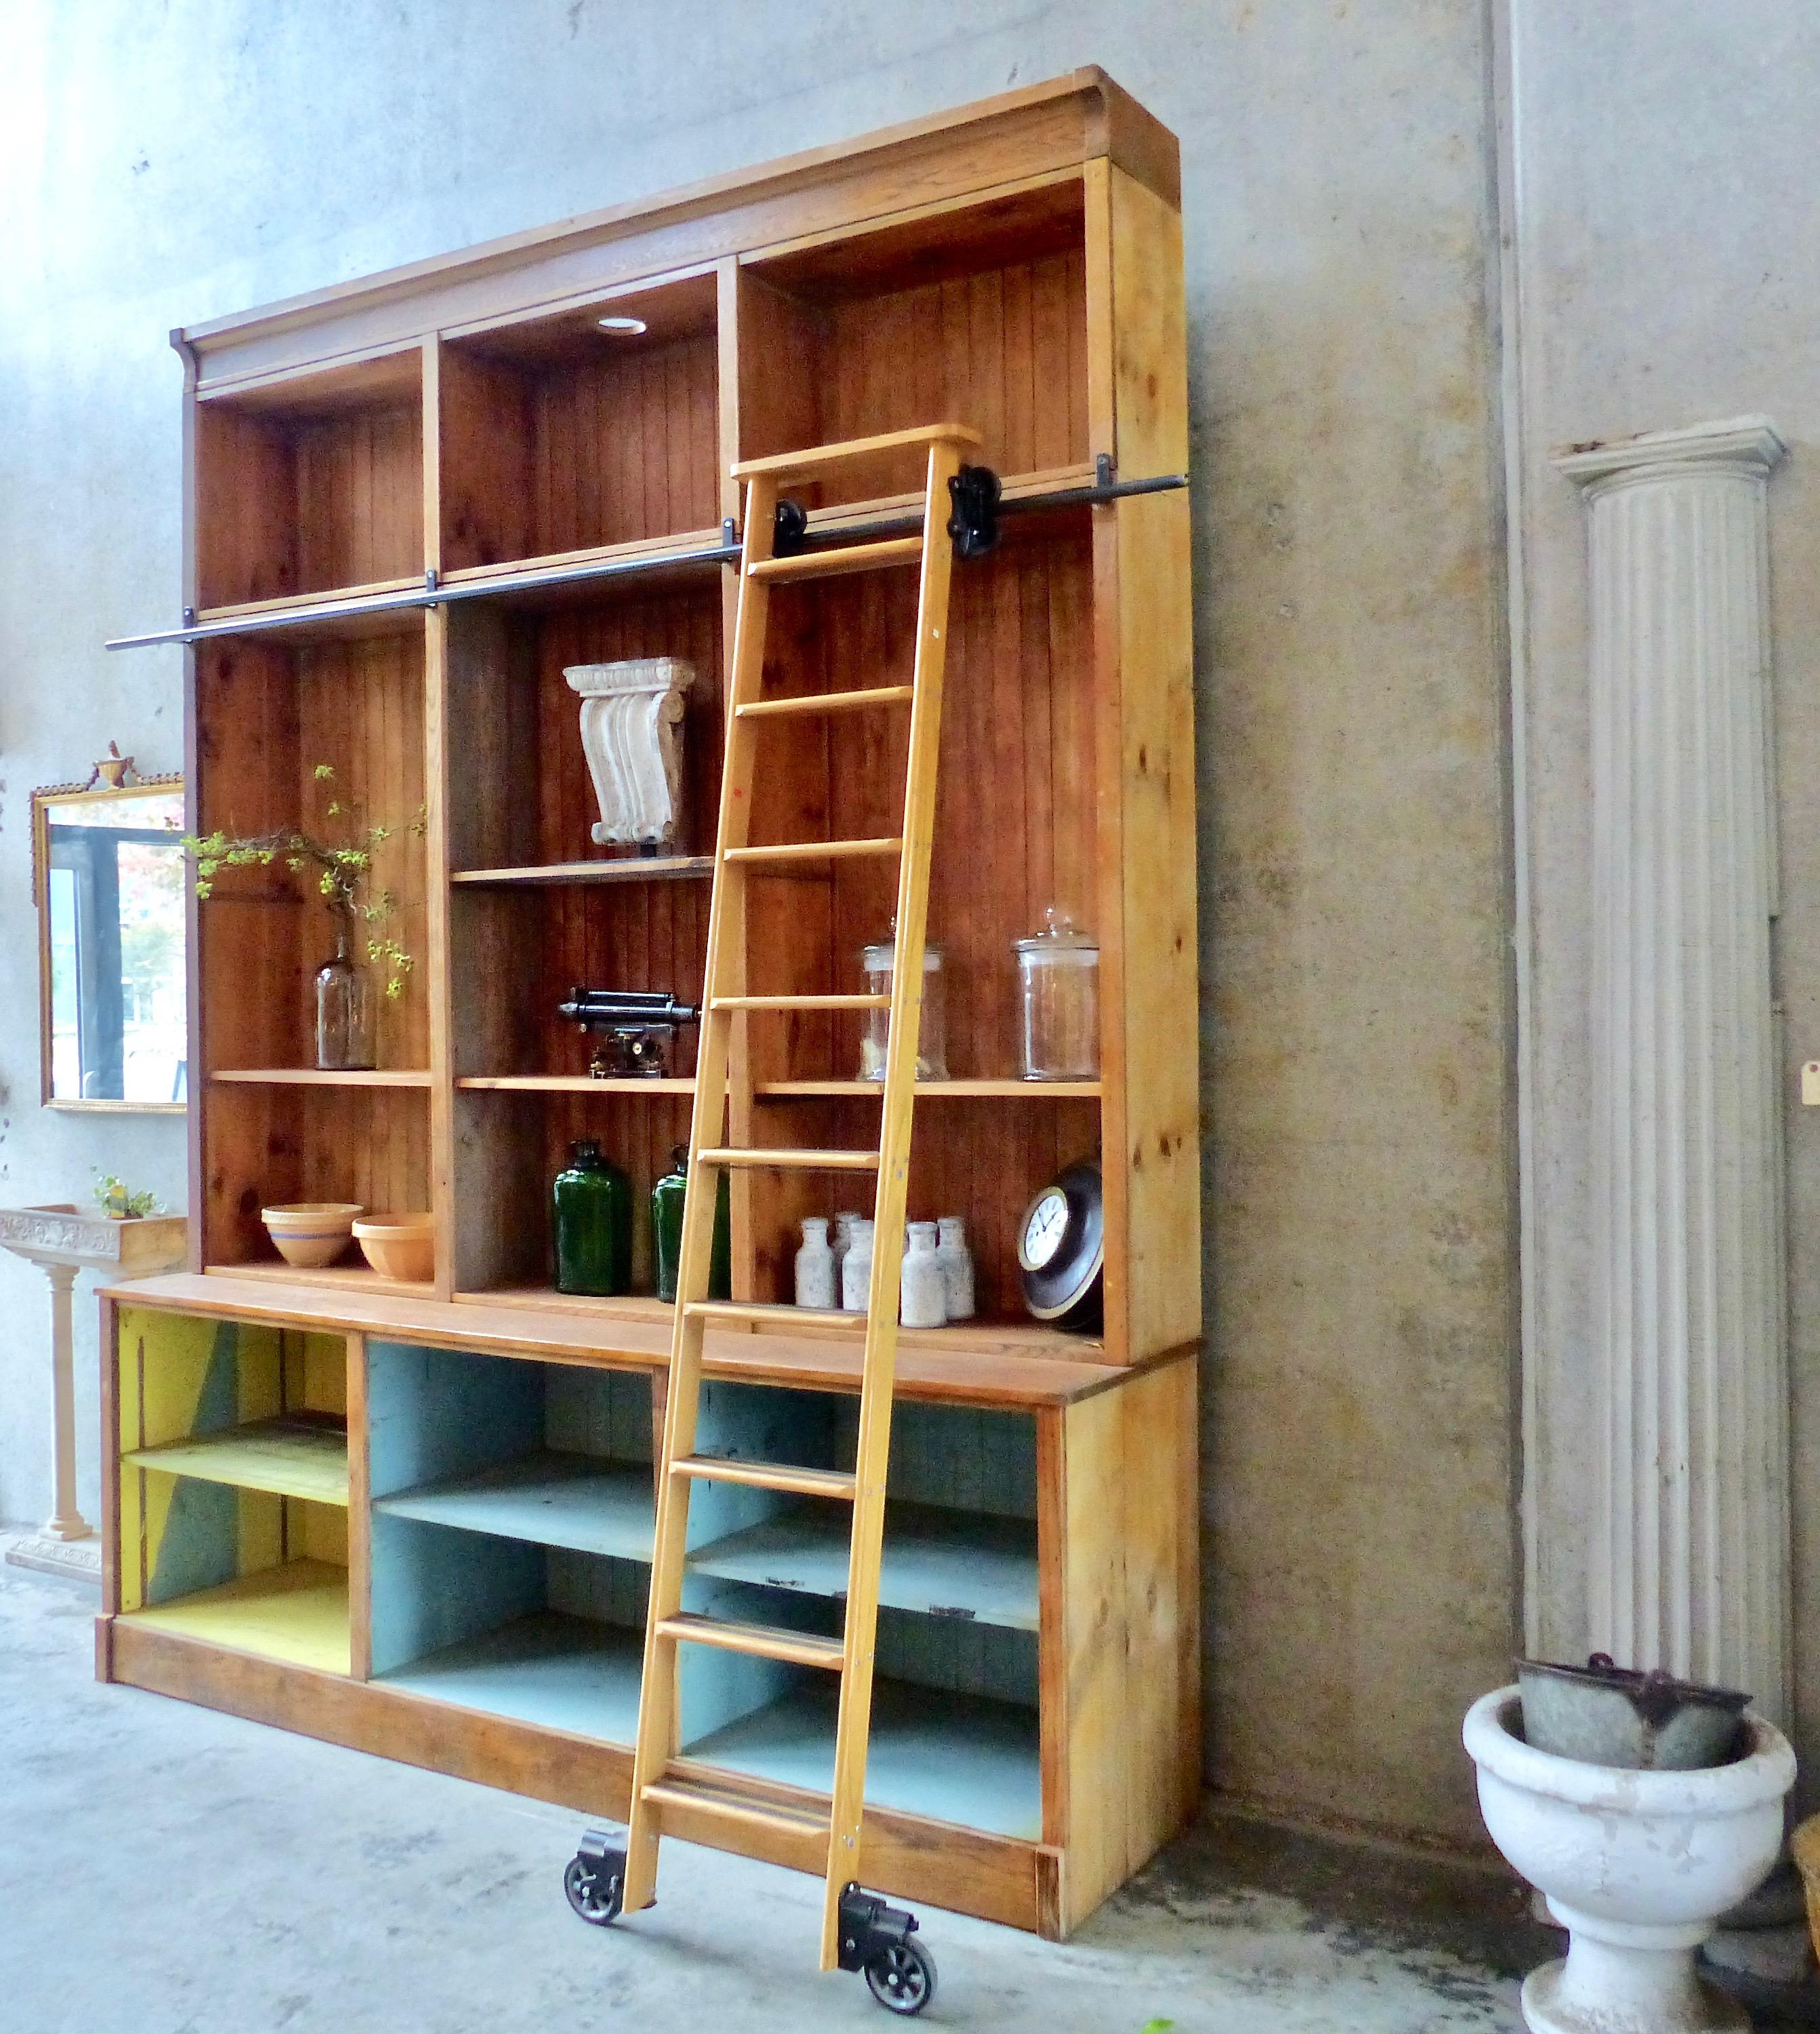 Salvaged from a former hardware store, a circa 1920 pine storage unit. Comes complete with a rolling library-style ladder, and features multiple open shelves backed by bead board. The large cabinet breaks down into components for ease of shipping